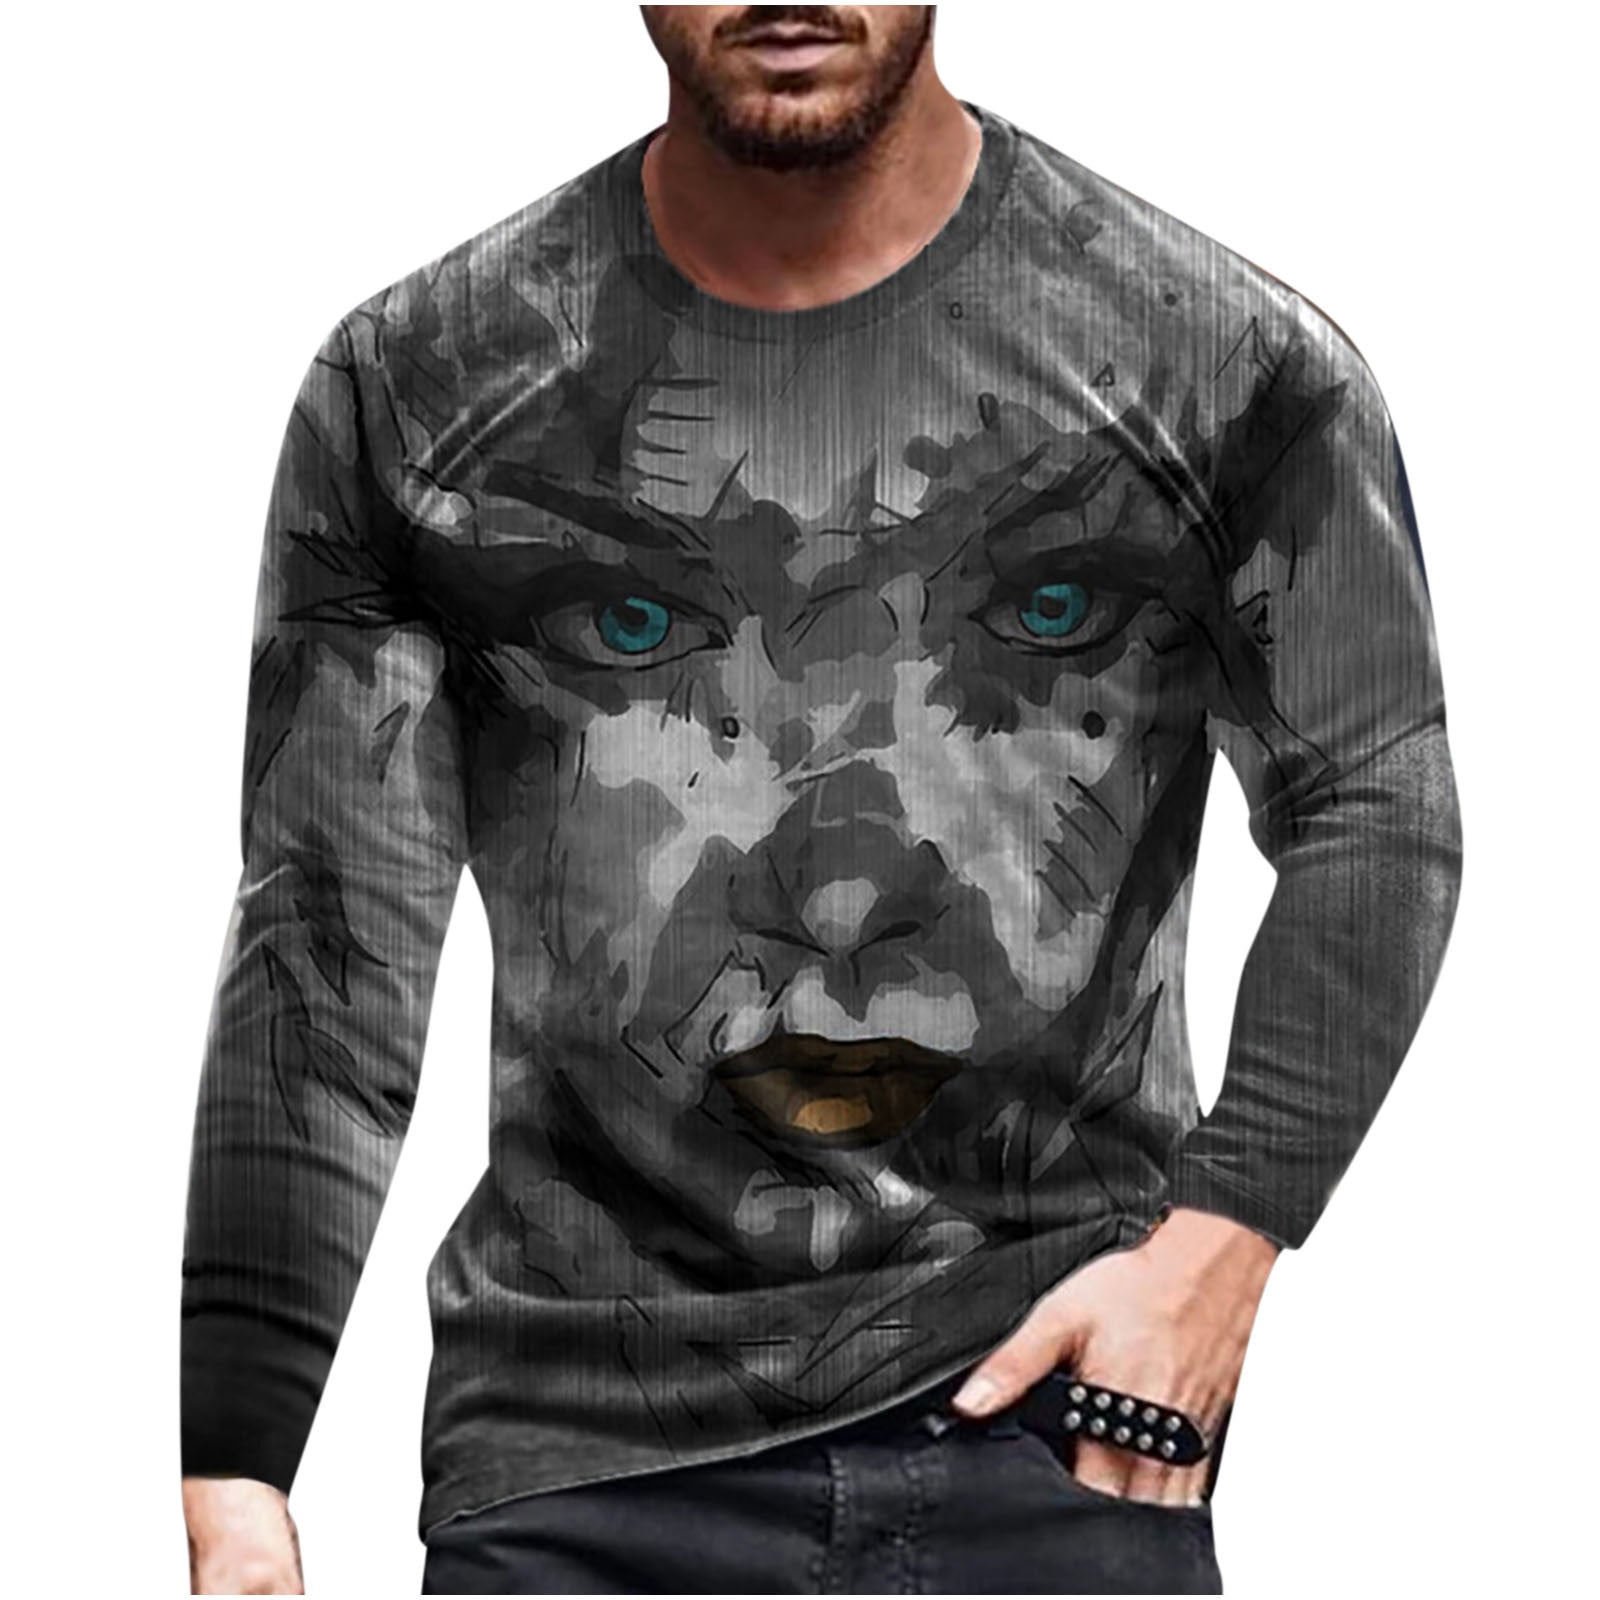 cllios Graphic T-shirts for Men Summer Casual 3D Print Shirt Vintage Long  Sleeve Top Round Neck Fitness Muscle T Shirts 